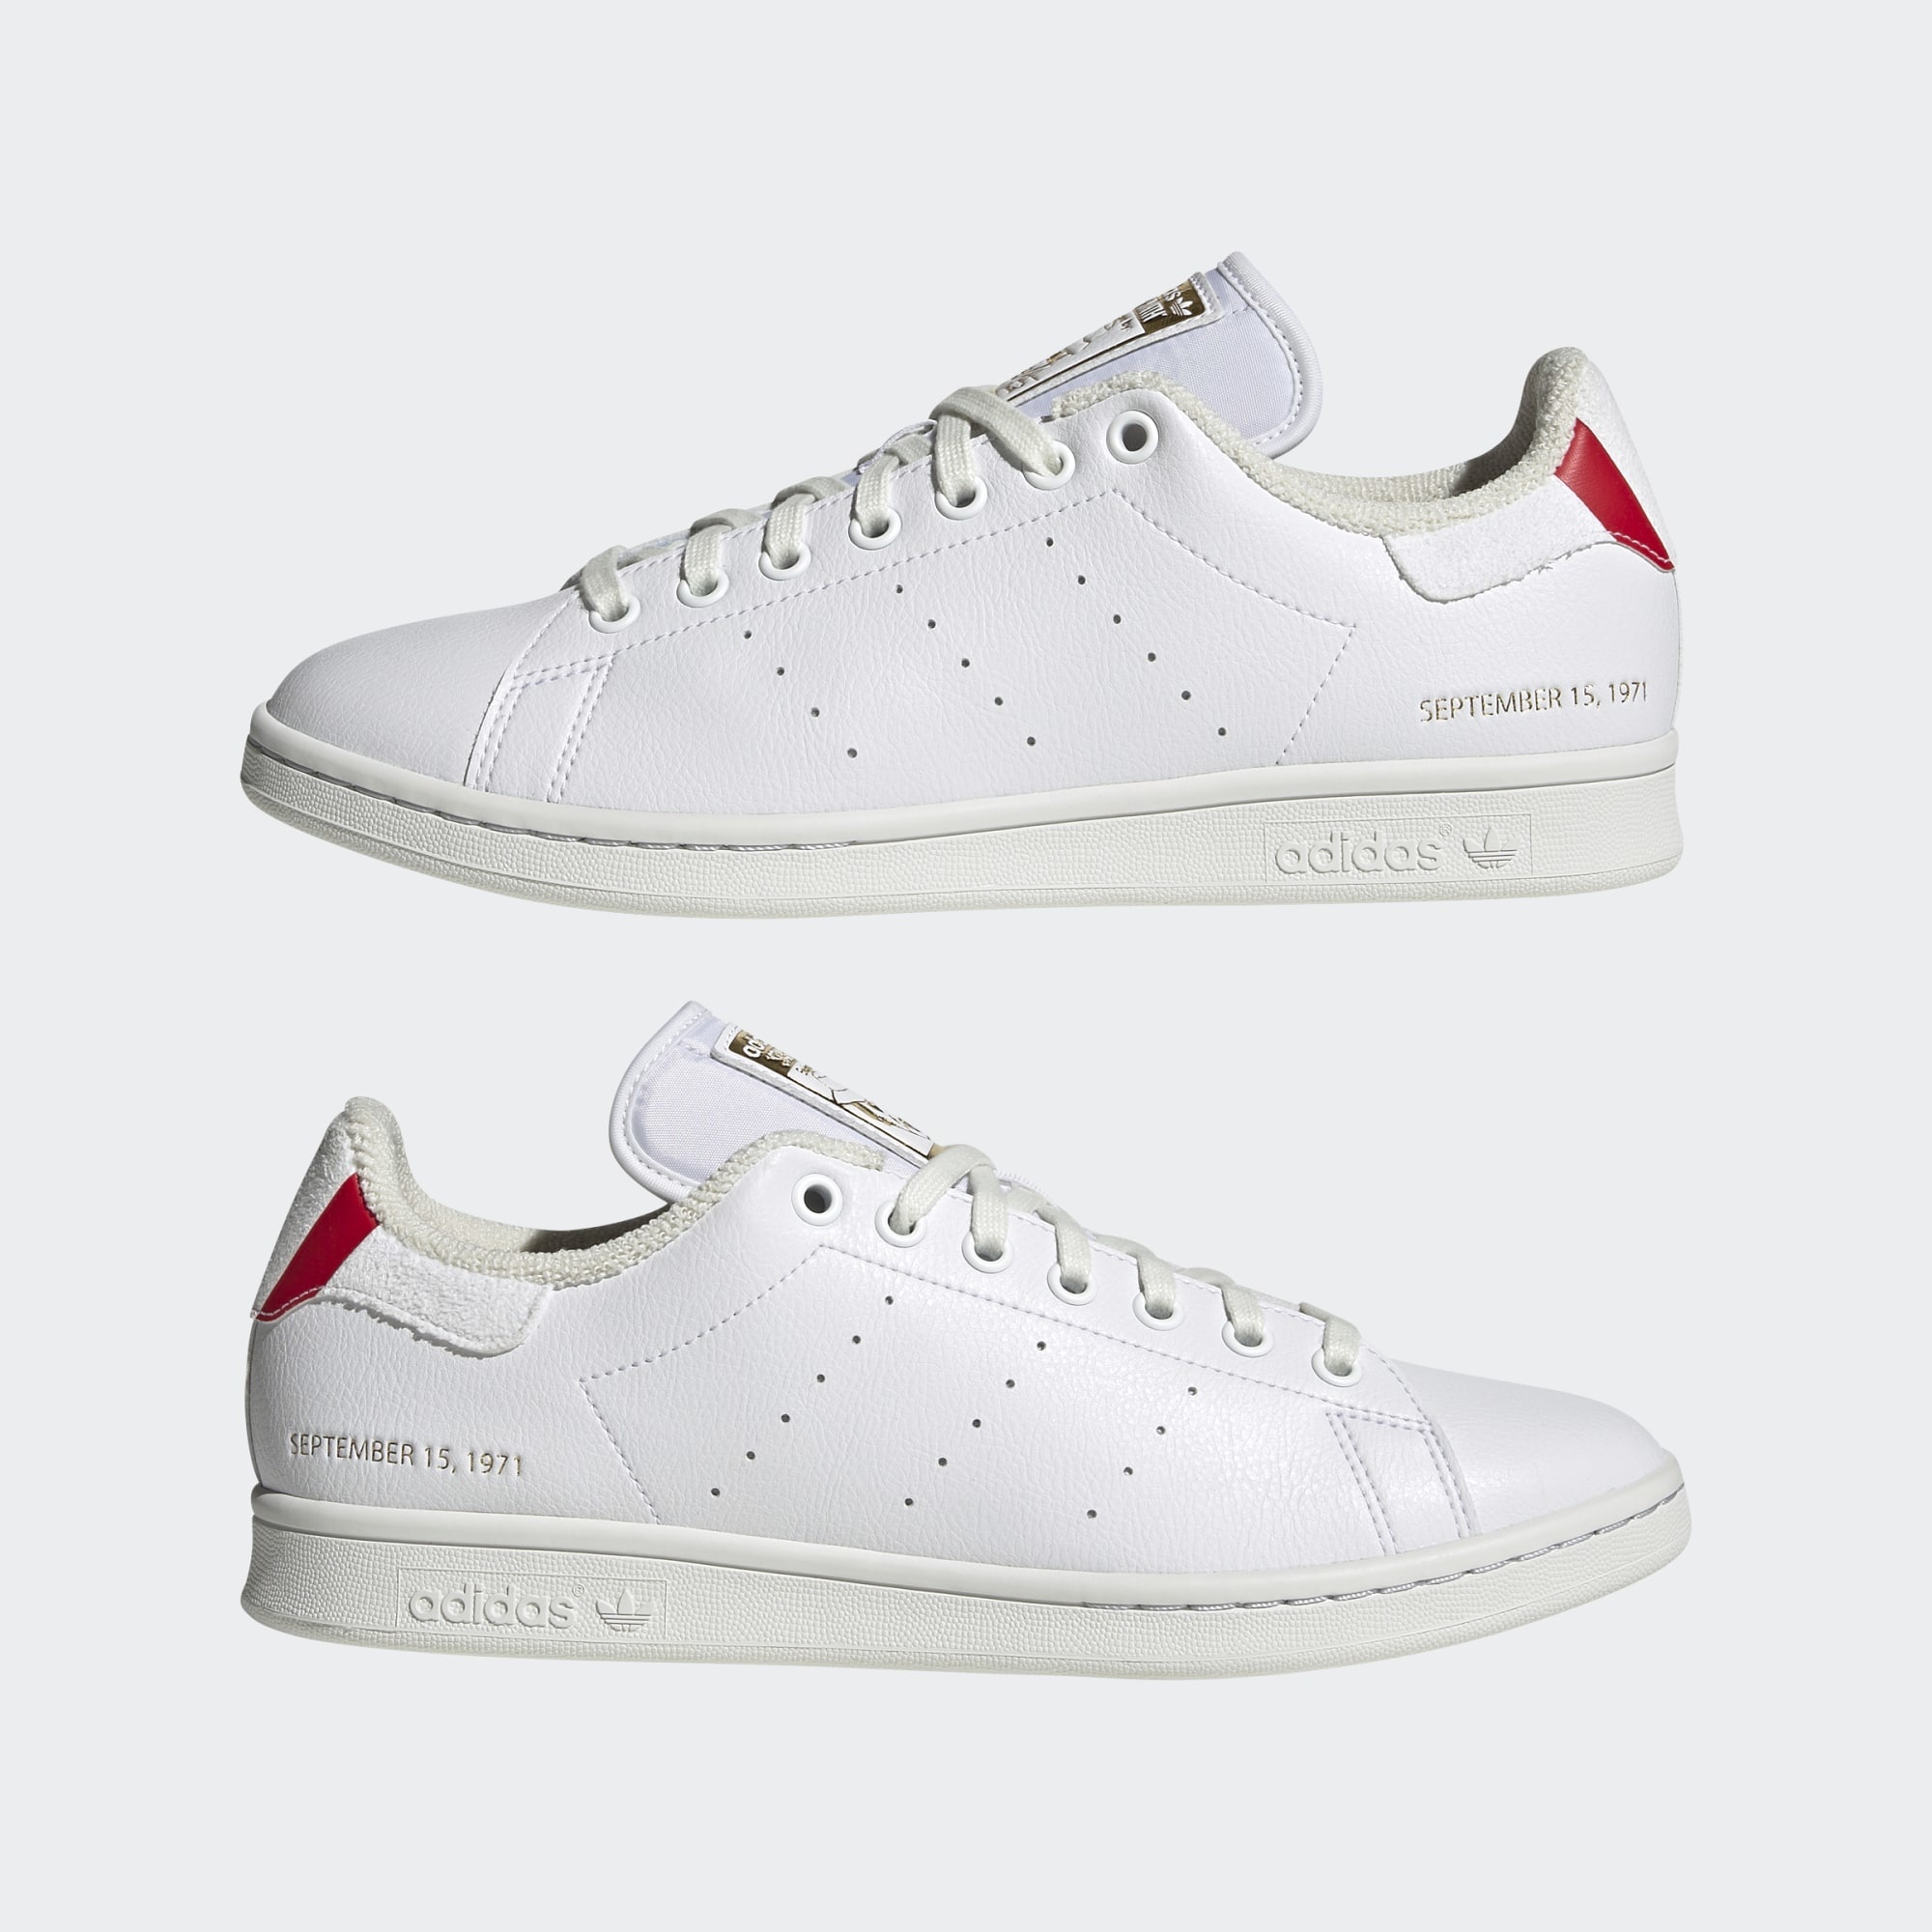 Stan Smith Cloud White/Blue/Scarlet - Topia Sale and Service in Tennis